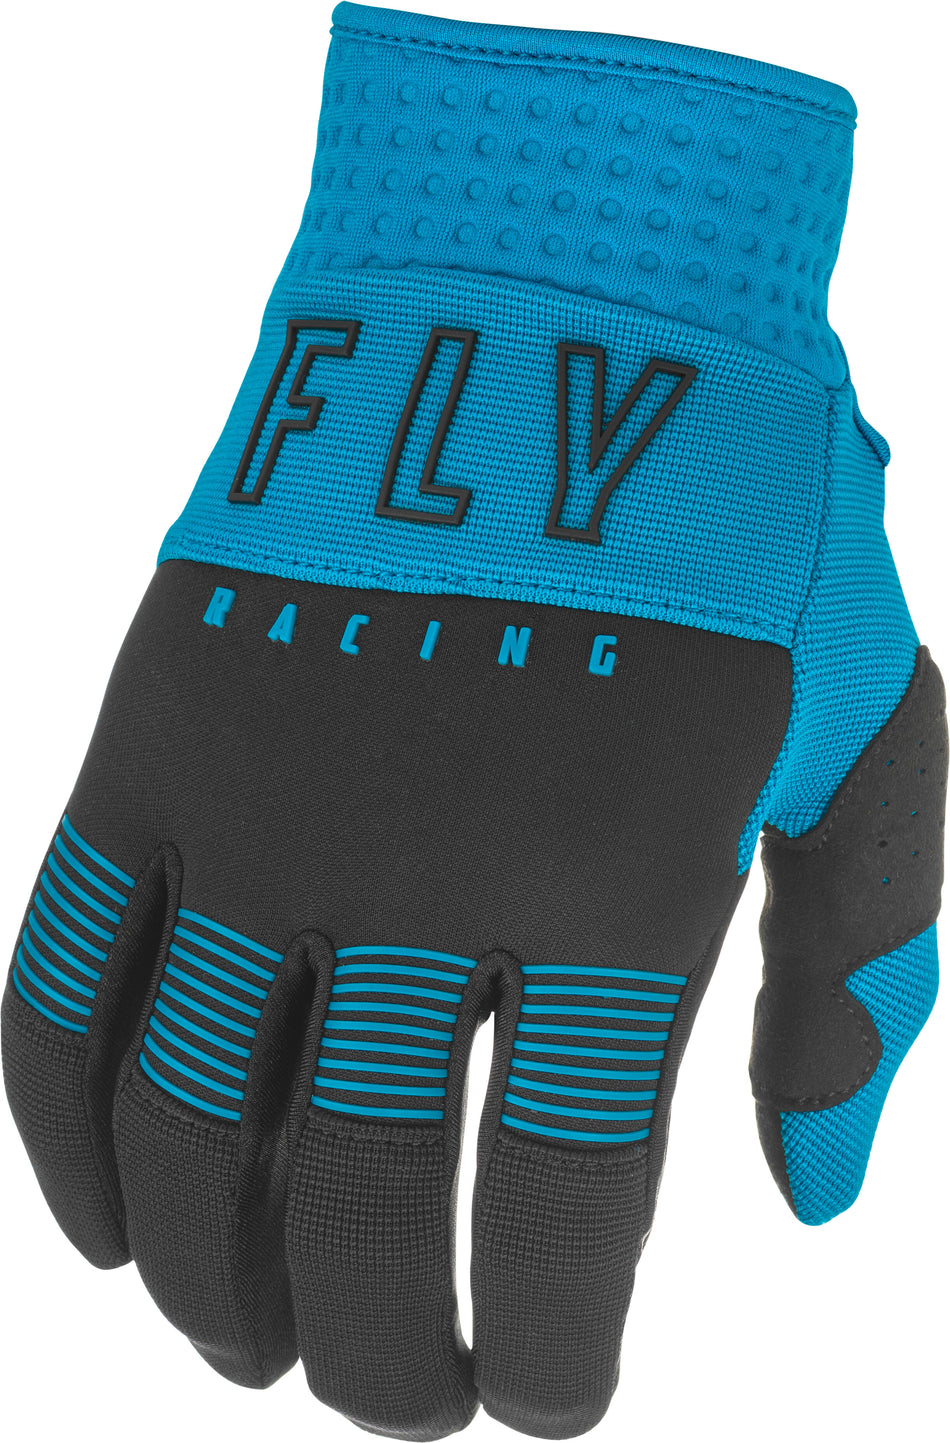 FLY RACING Youth F-16 Gloves Blue/Black Sz 05 374-91105